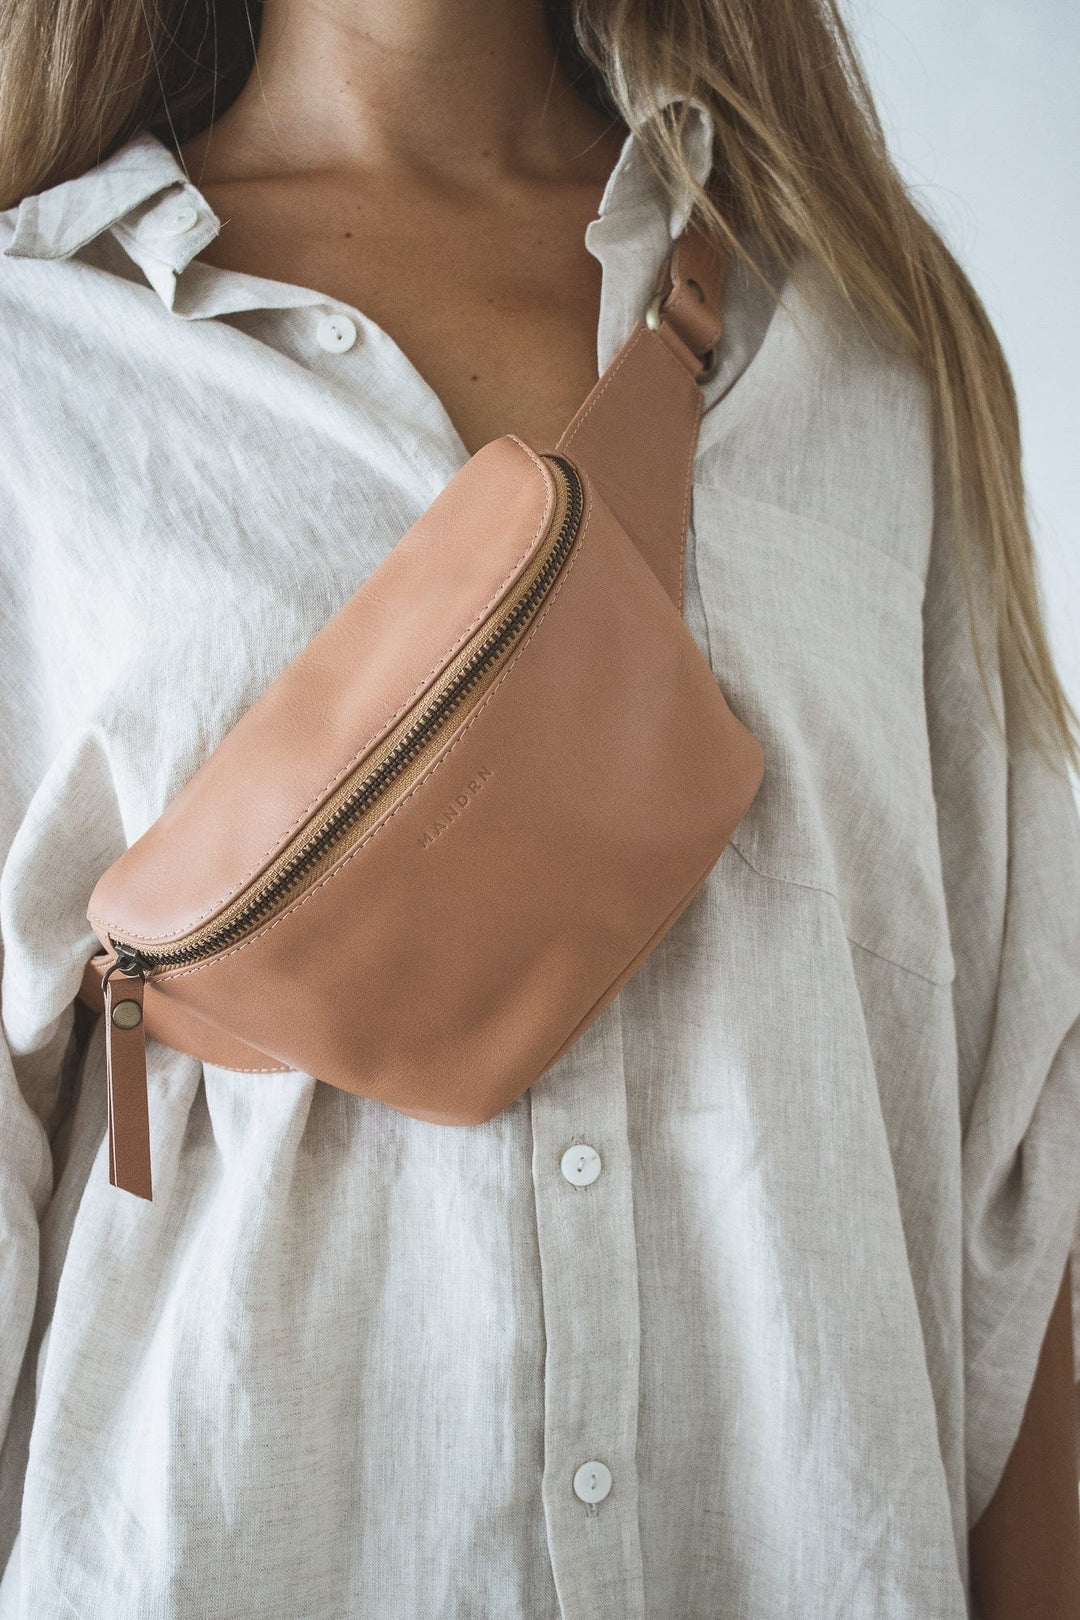 Remy Leather Fanny Pack